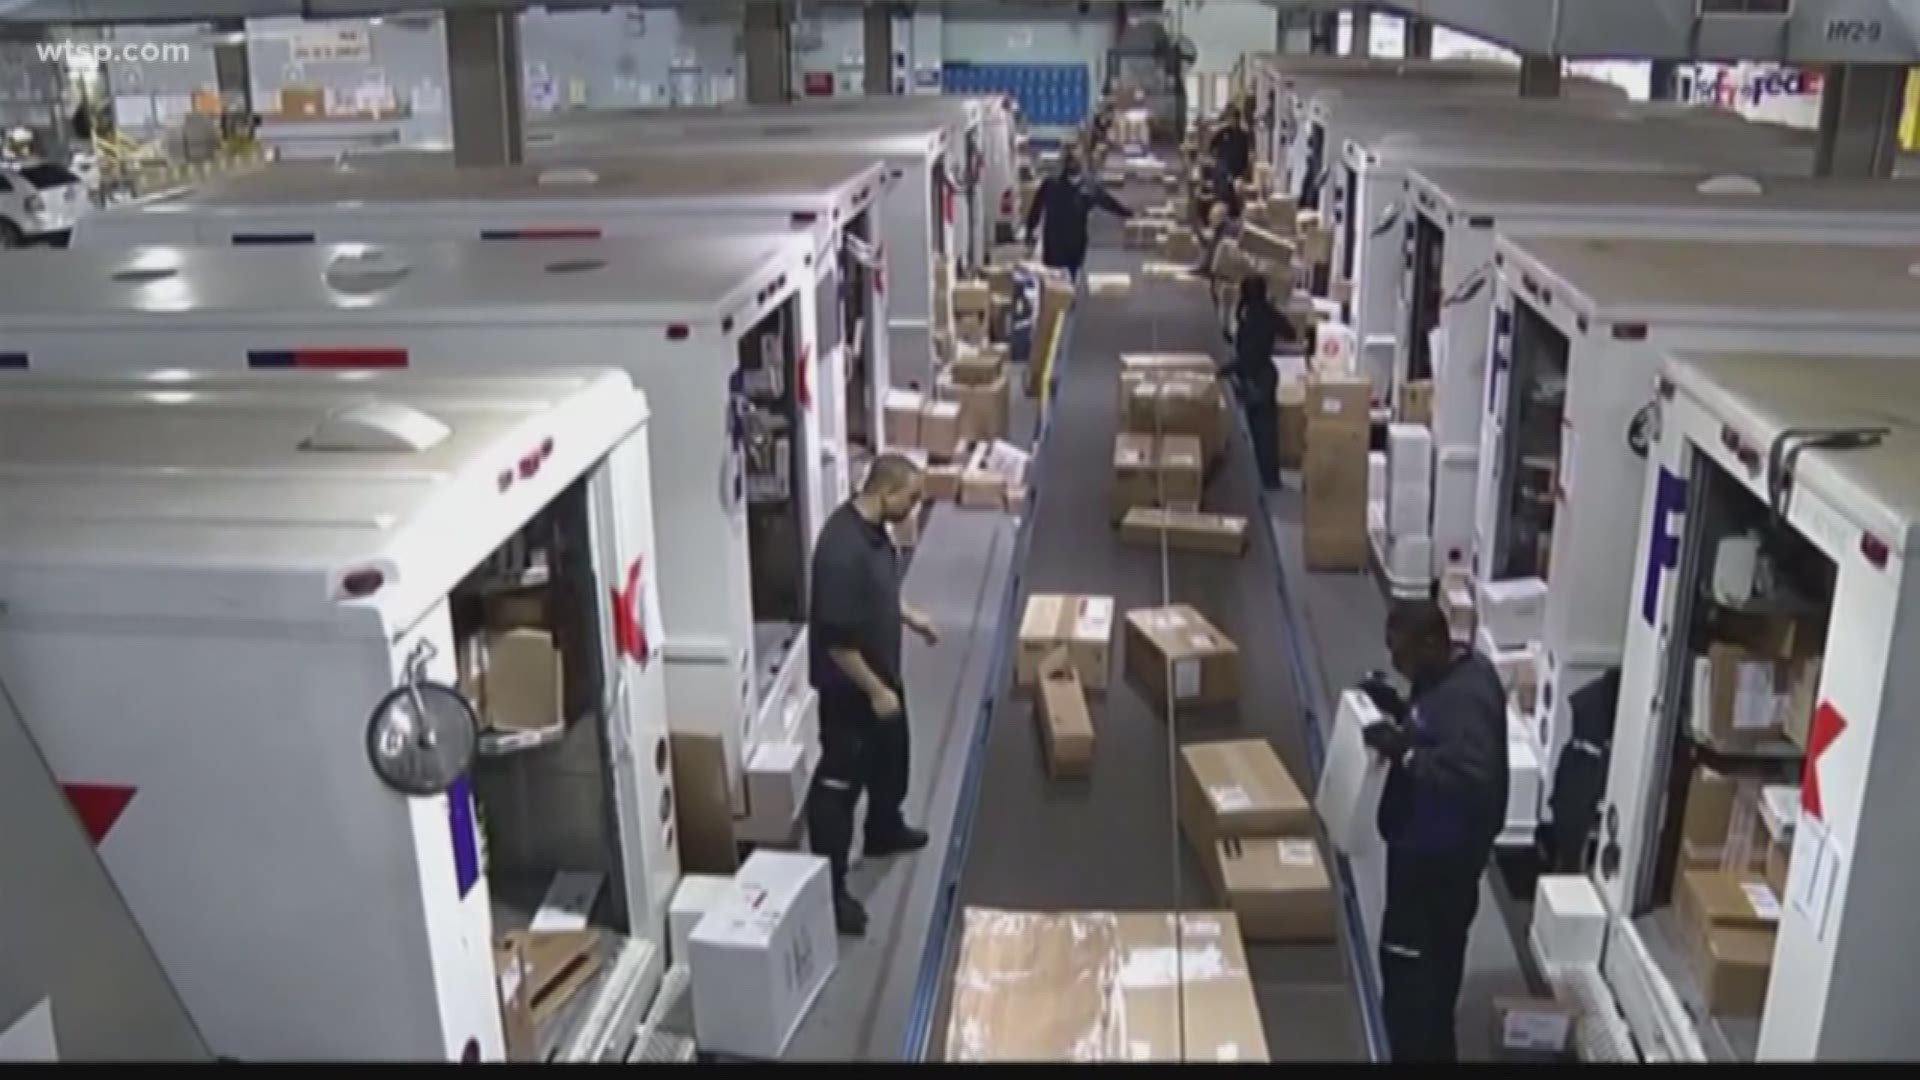 It's estimated that 26.1 million Americans have had a holiday package stolen from their home.